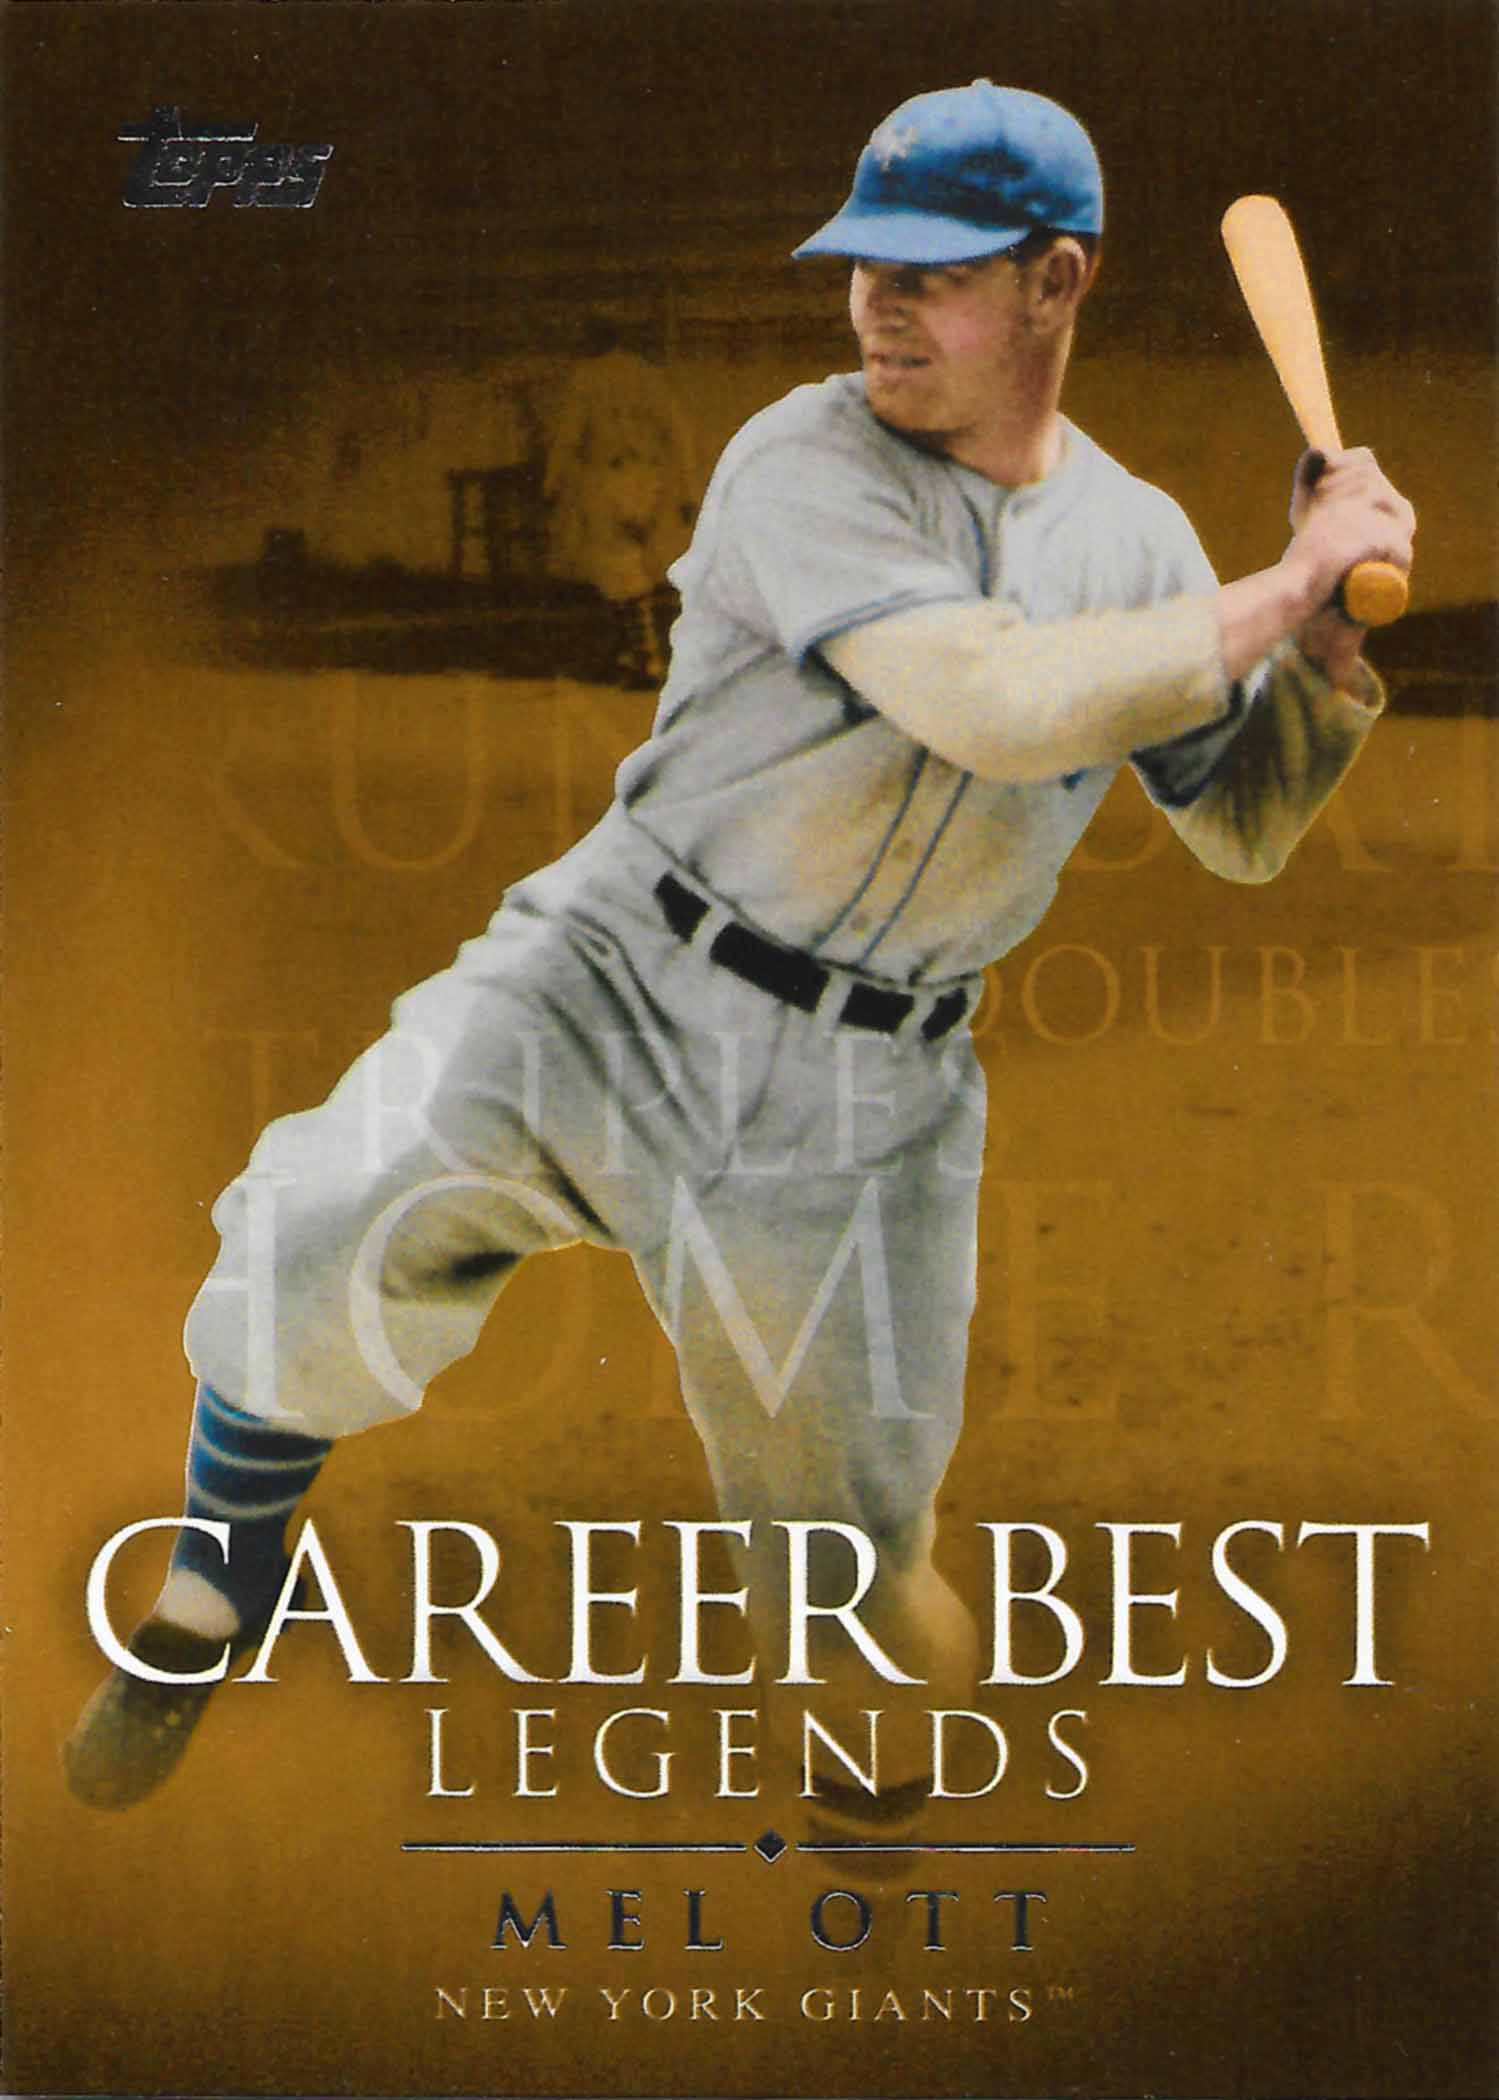 2009 Topps Legends of the Game Career Best